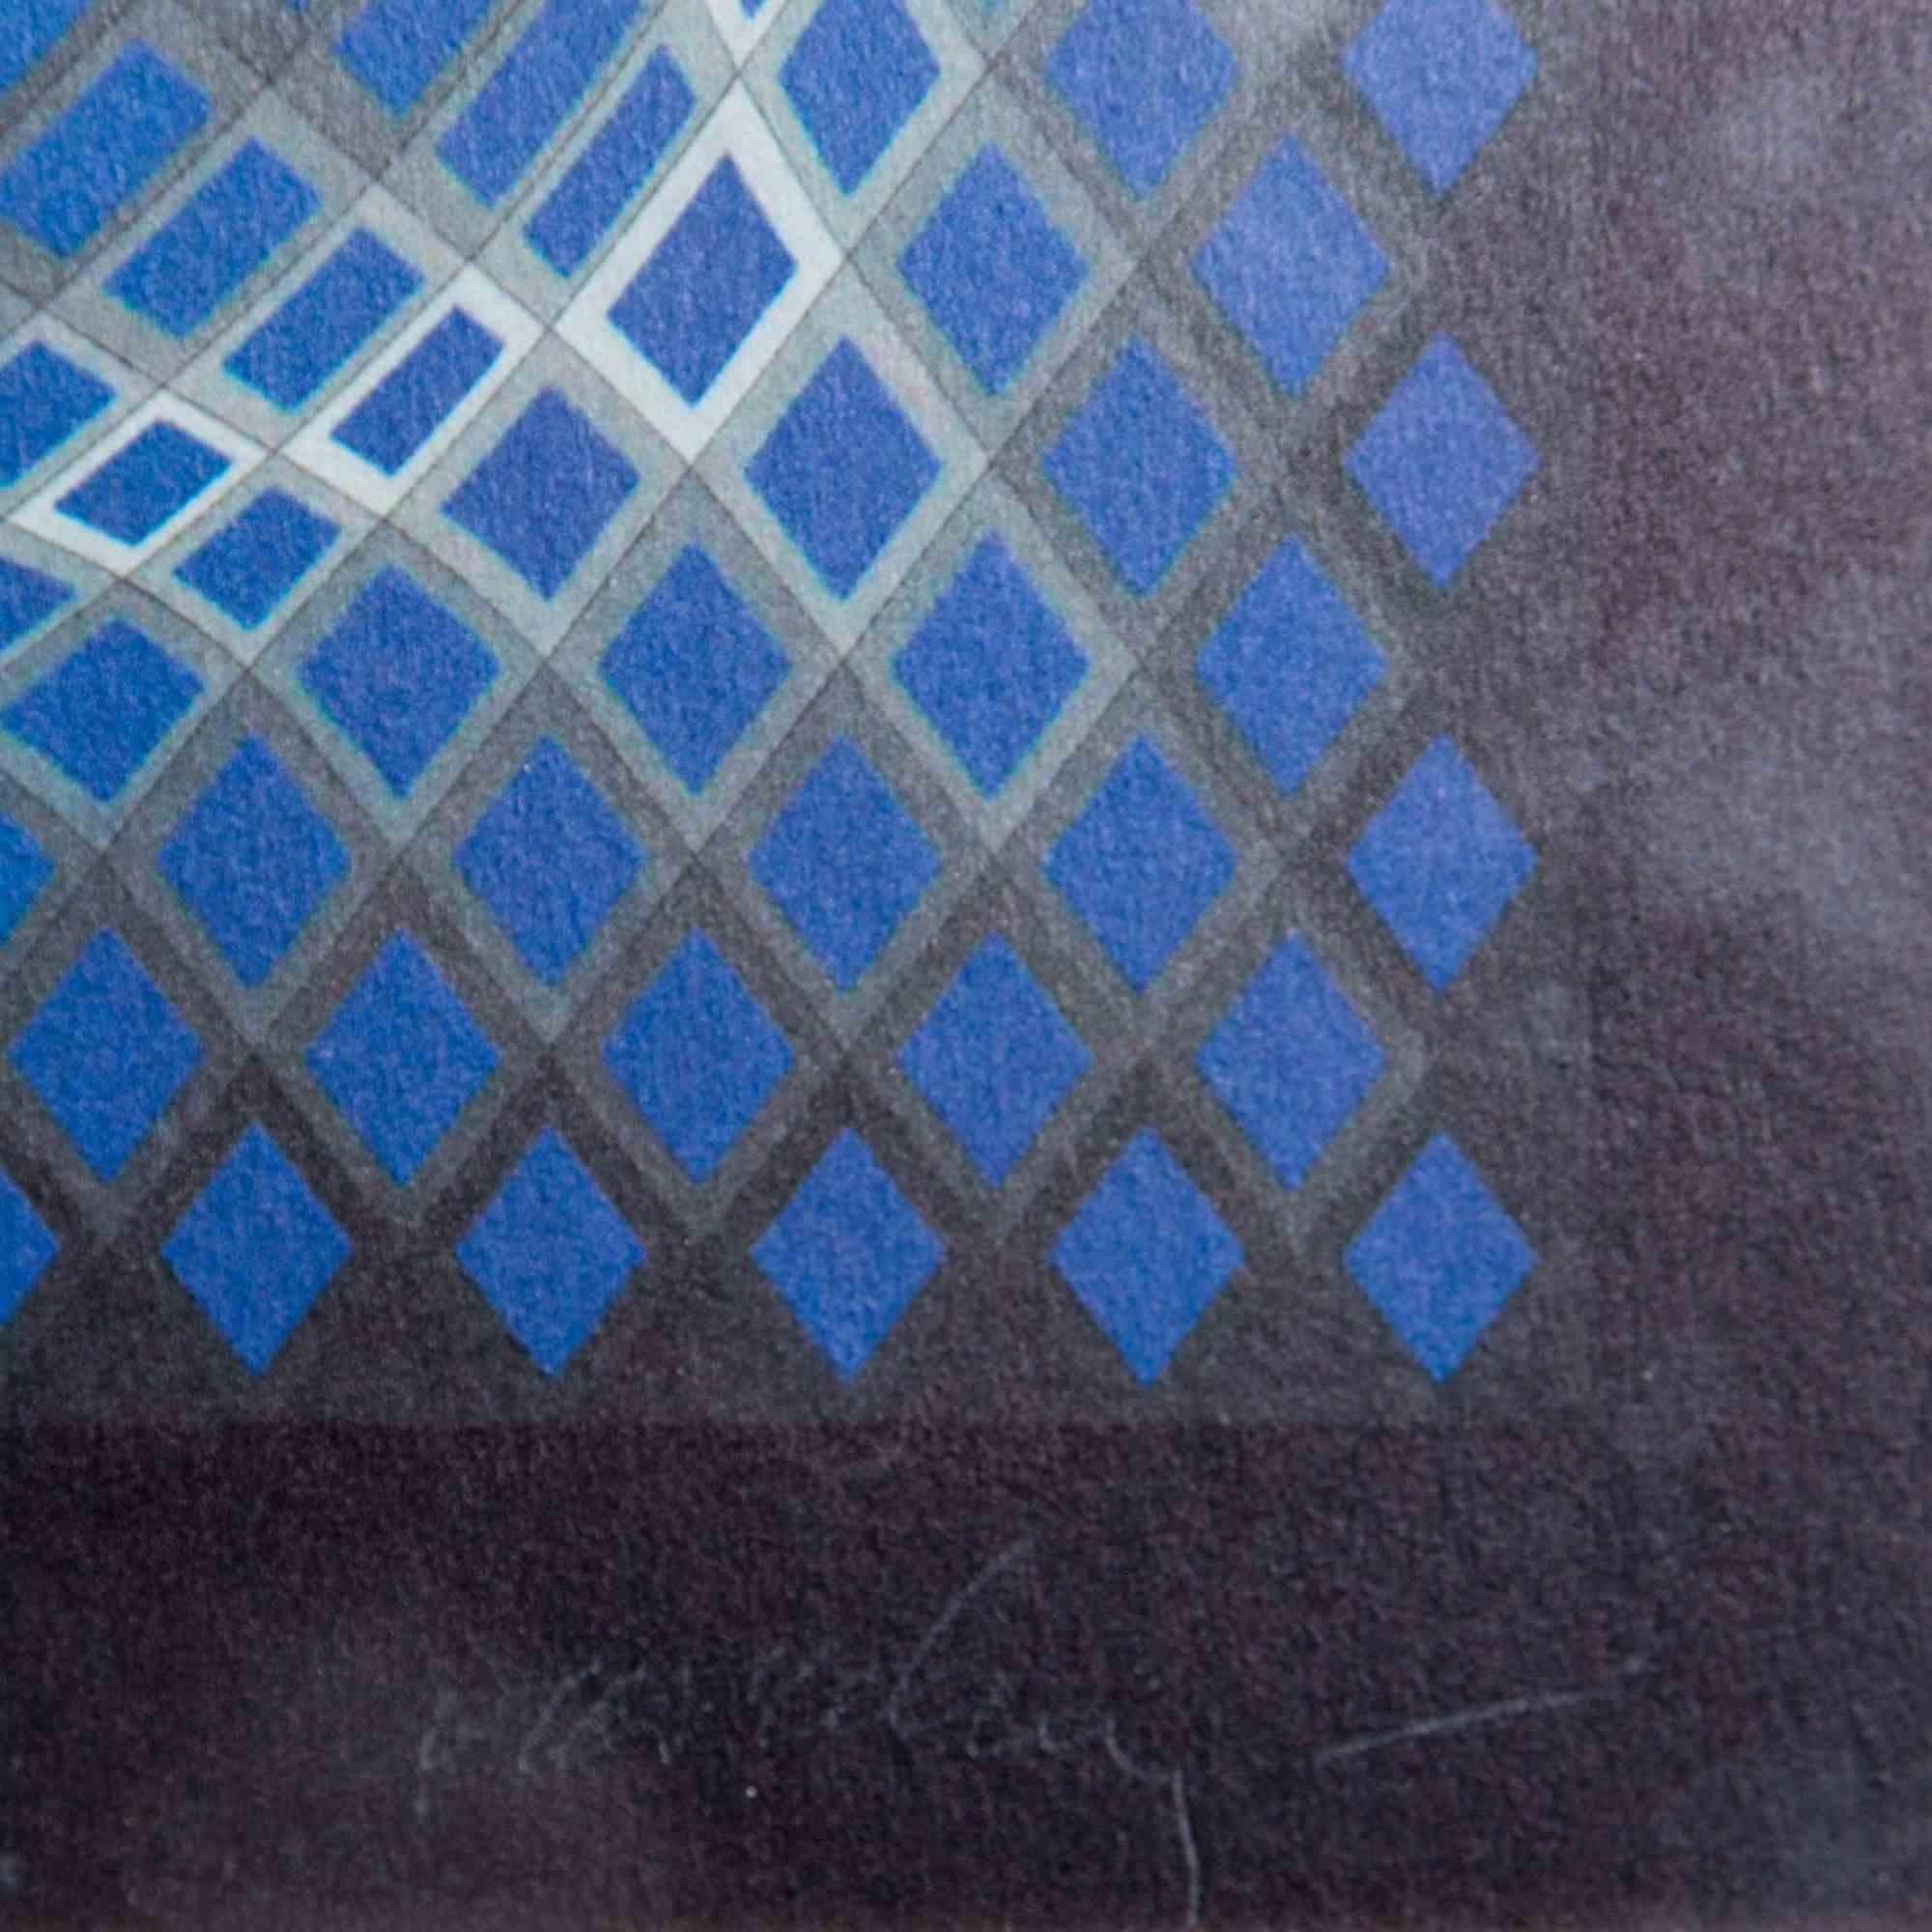 Lattice - Screen Print by V. Vasarely - 1980s - Black Abstract Print by Victor Vasarely